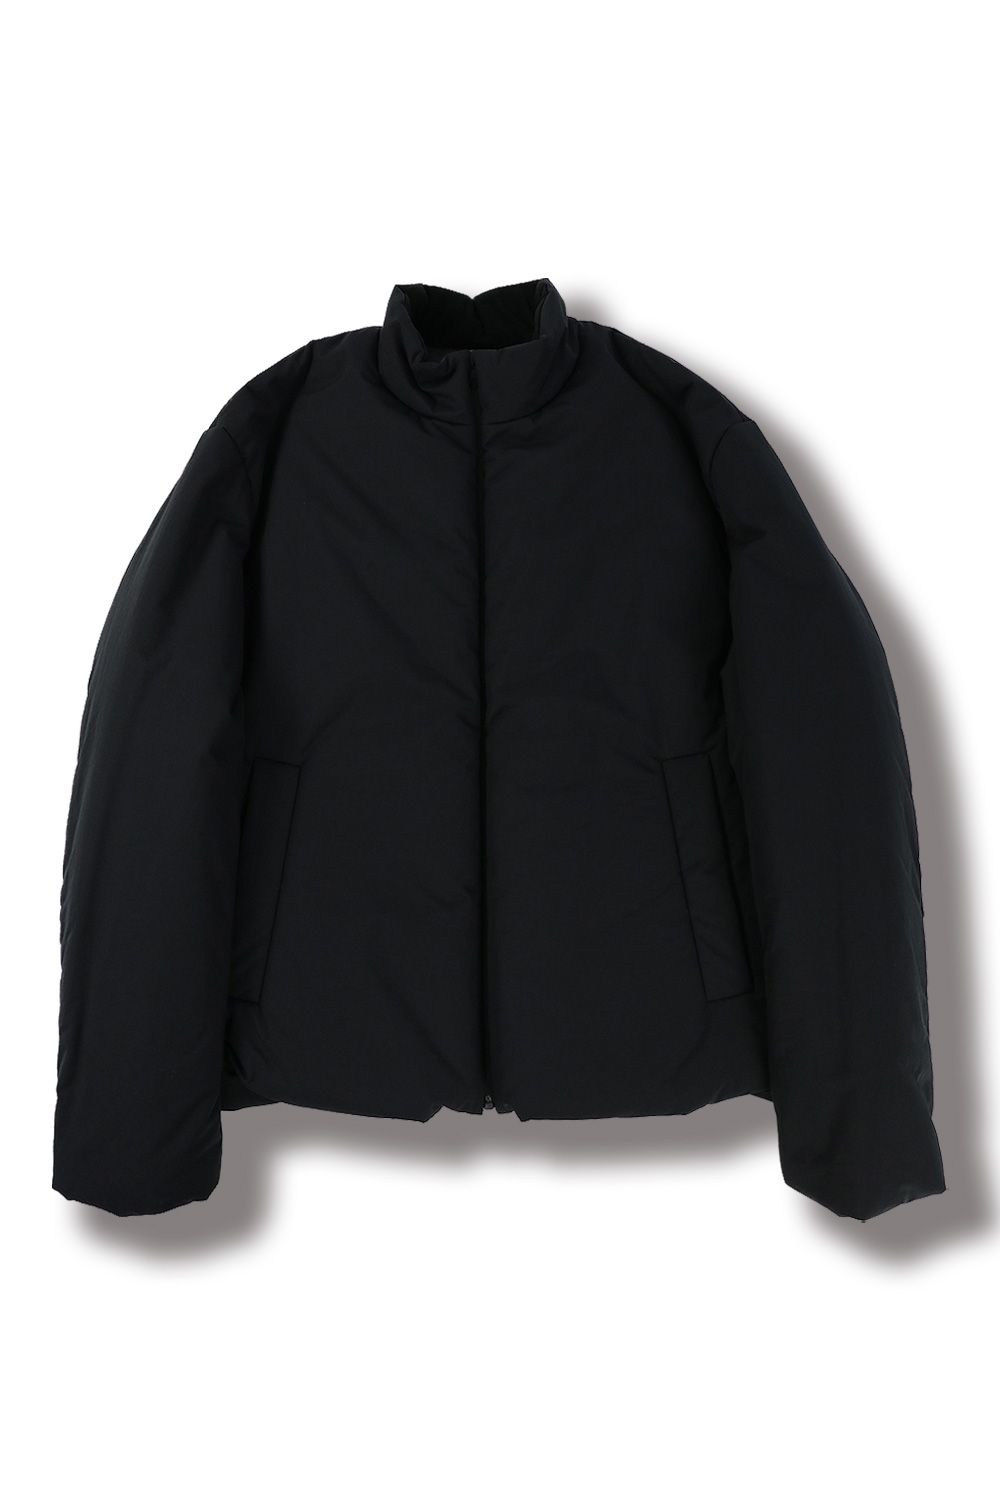 WEWILL - 【23AW】SOLID PUFFER JACKET(BLACK) | Acacia ...